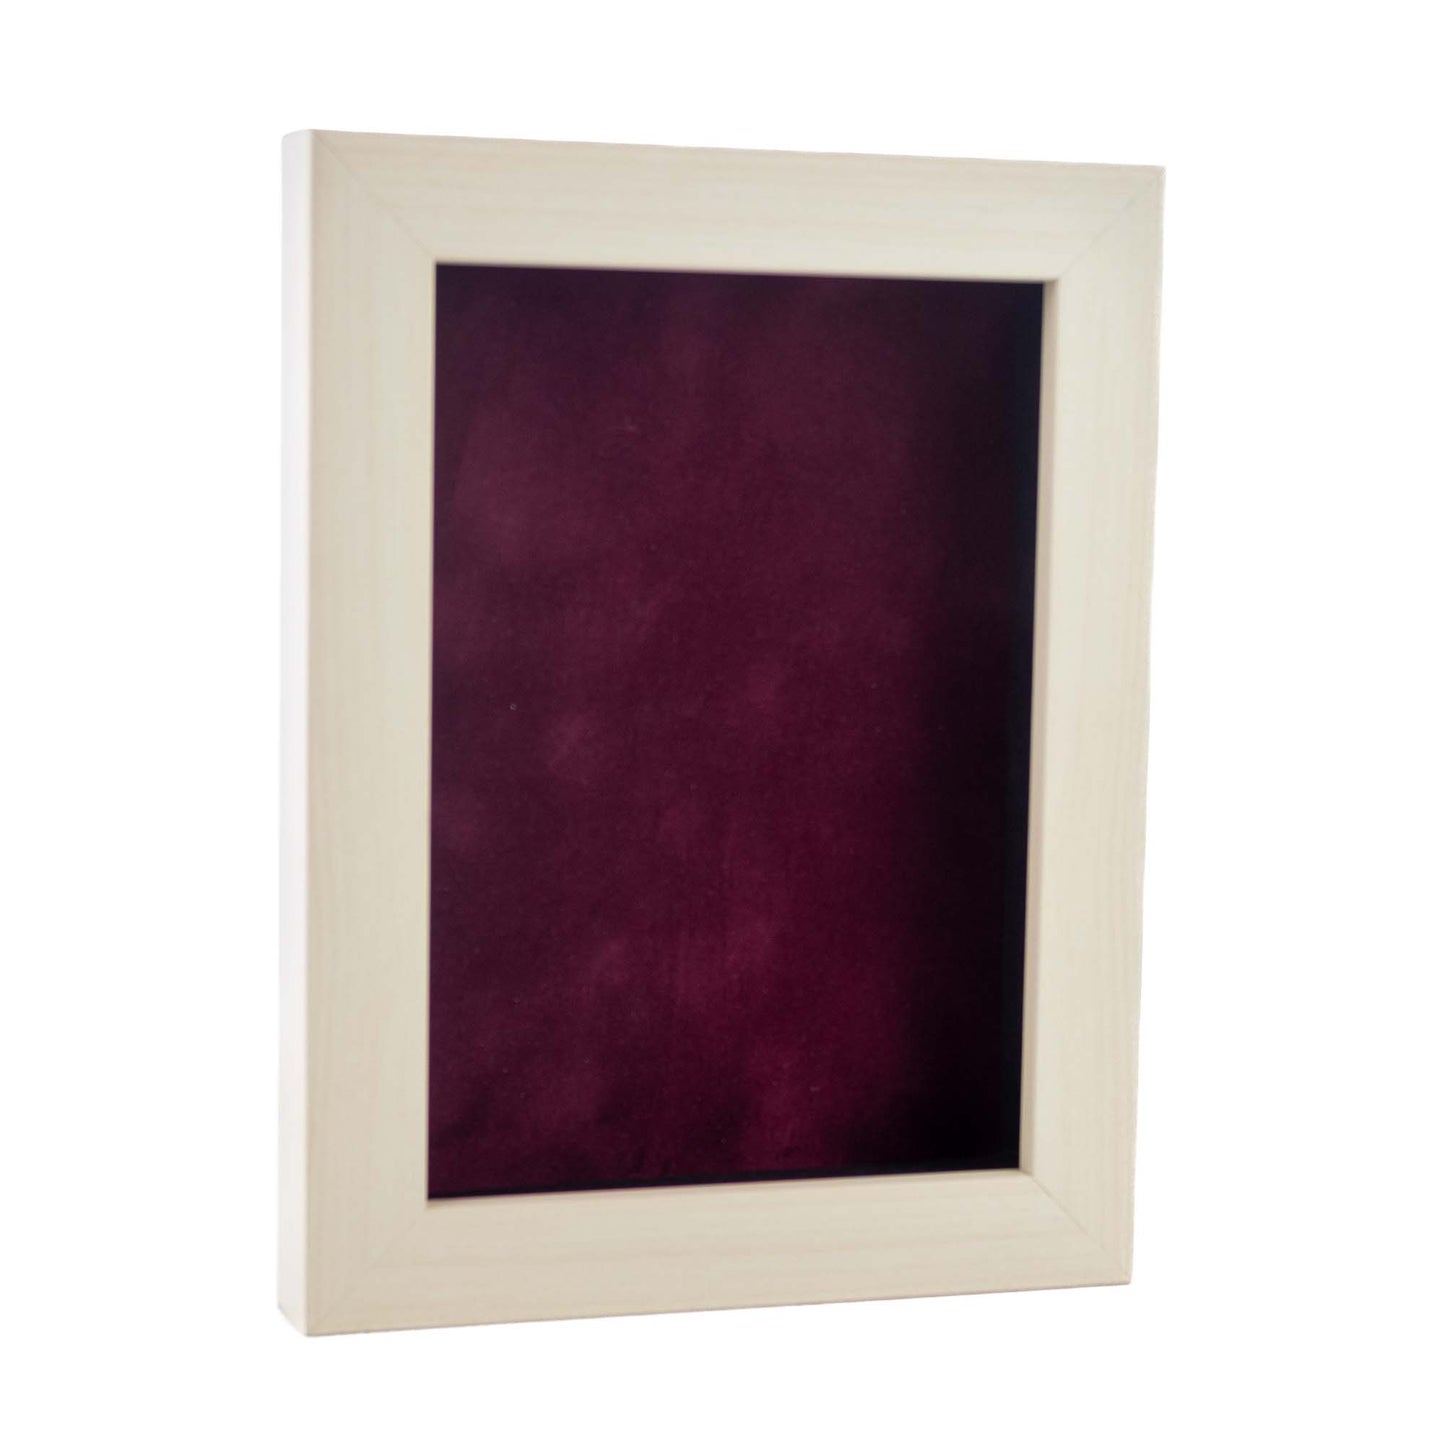 White Washed Shadow Box Frame With Dark Berry Acid-Free Suede Backing